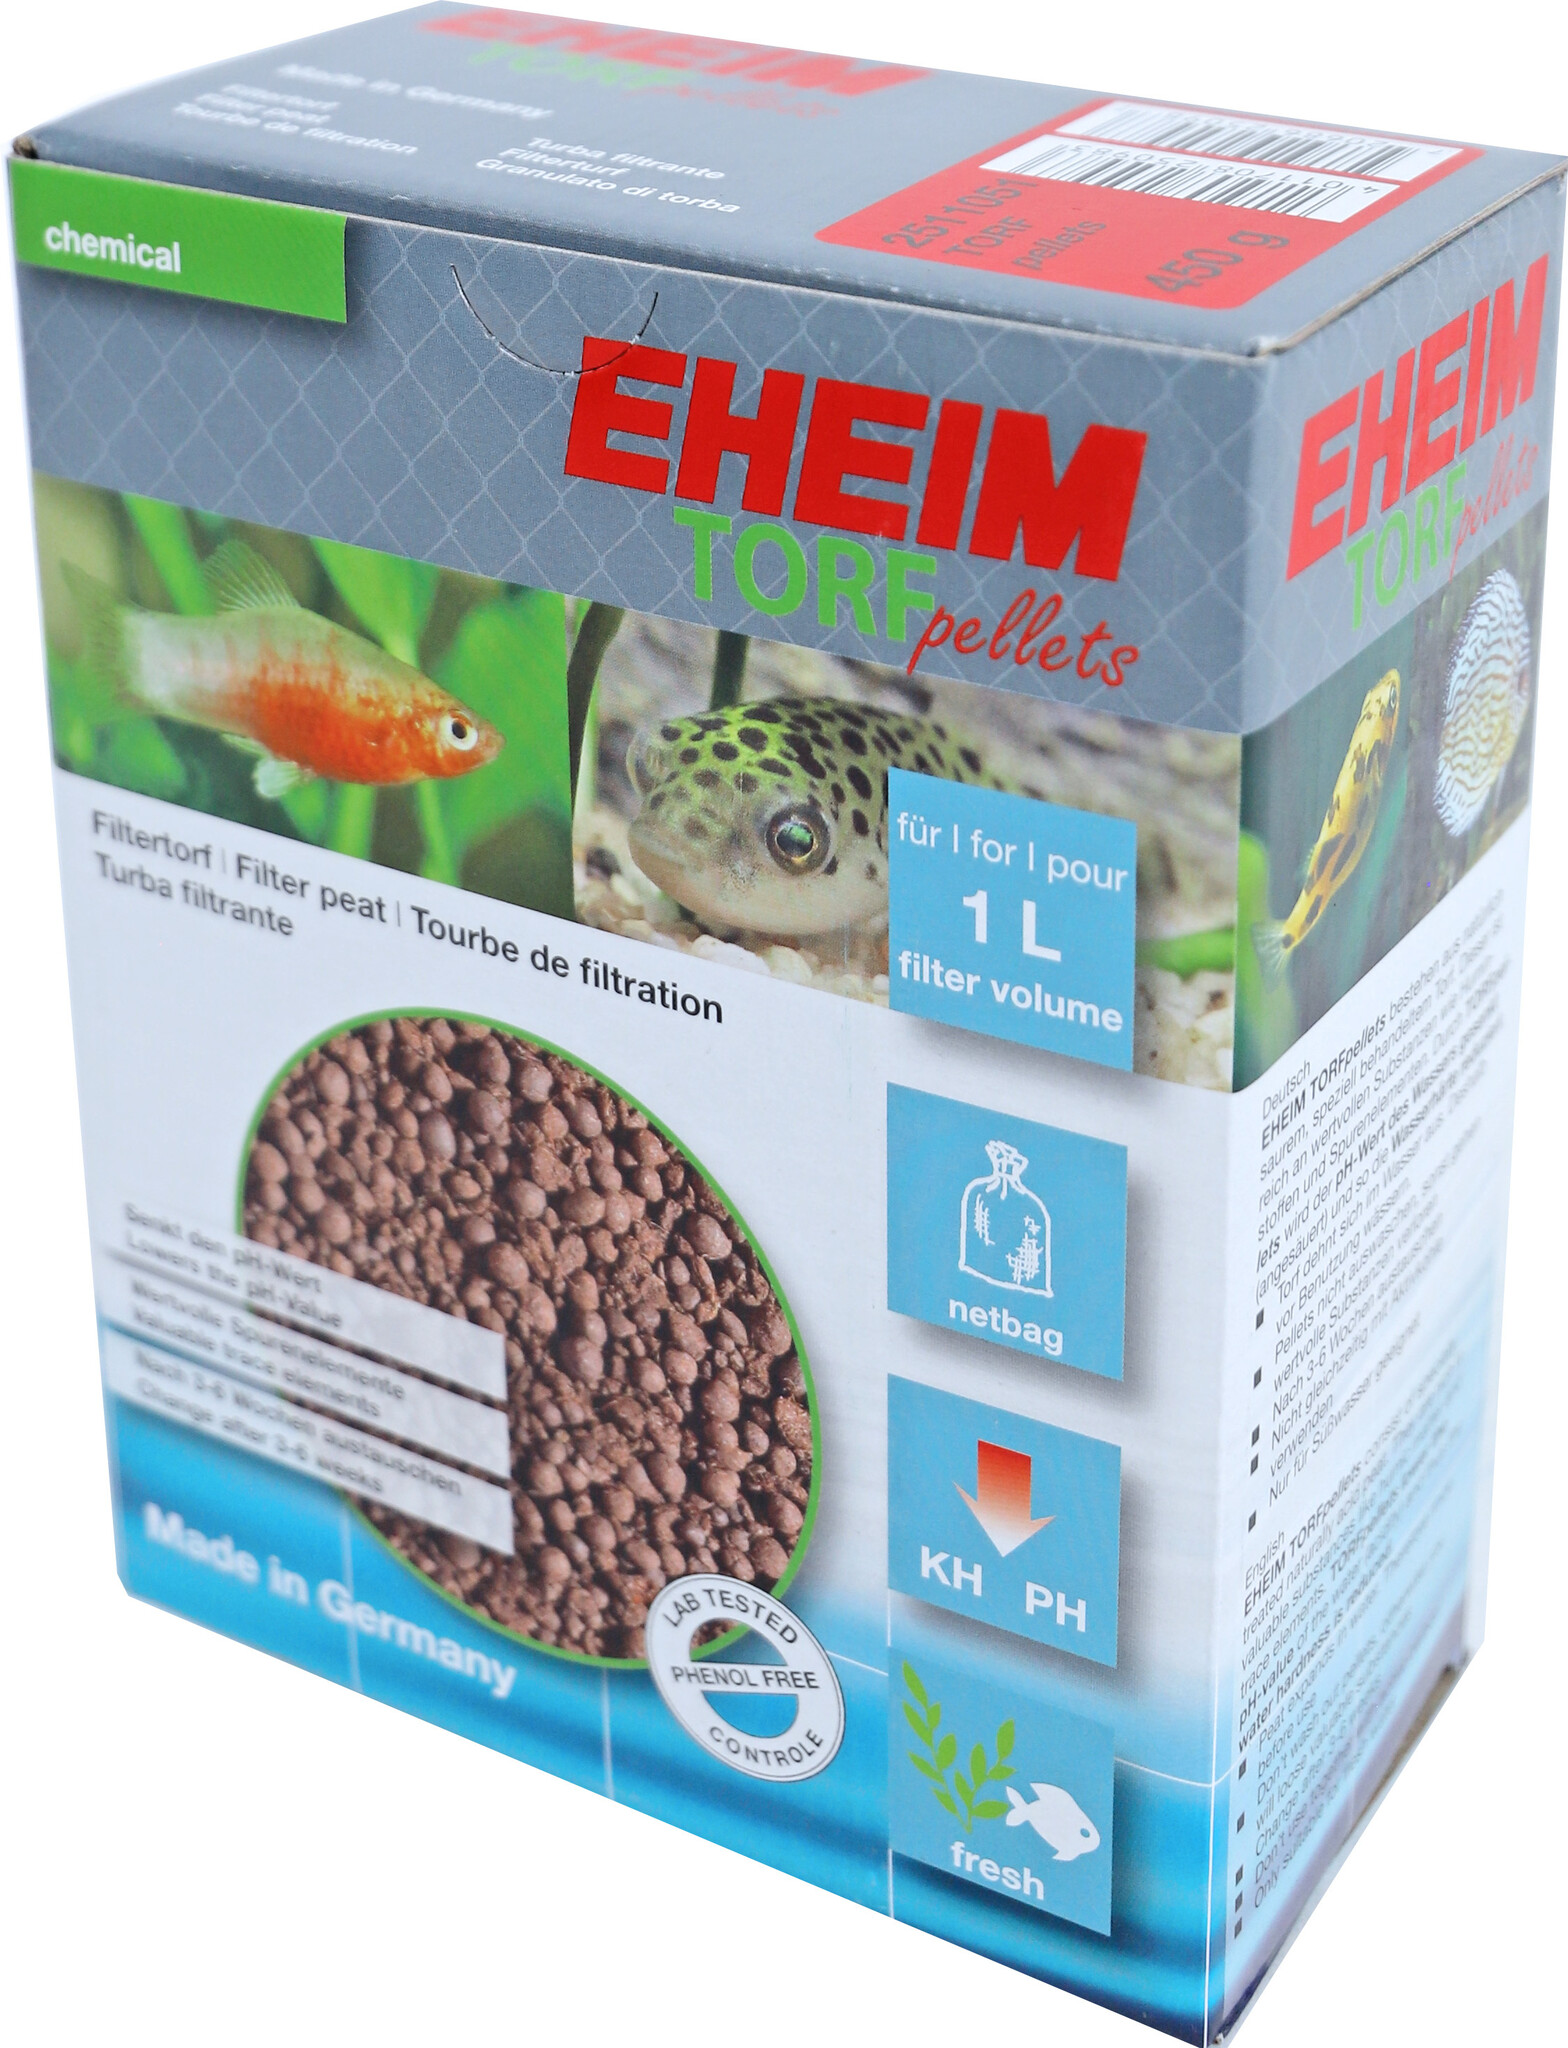 EHEIM TORFpellets 450g + netbag - filter peat for reduction of pH and KH